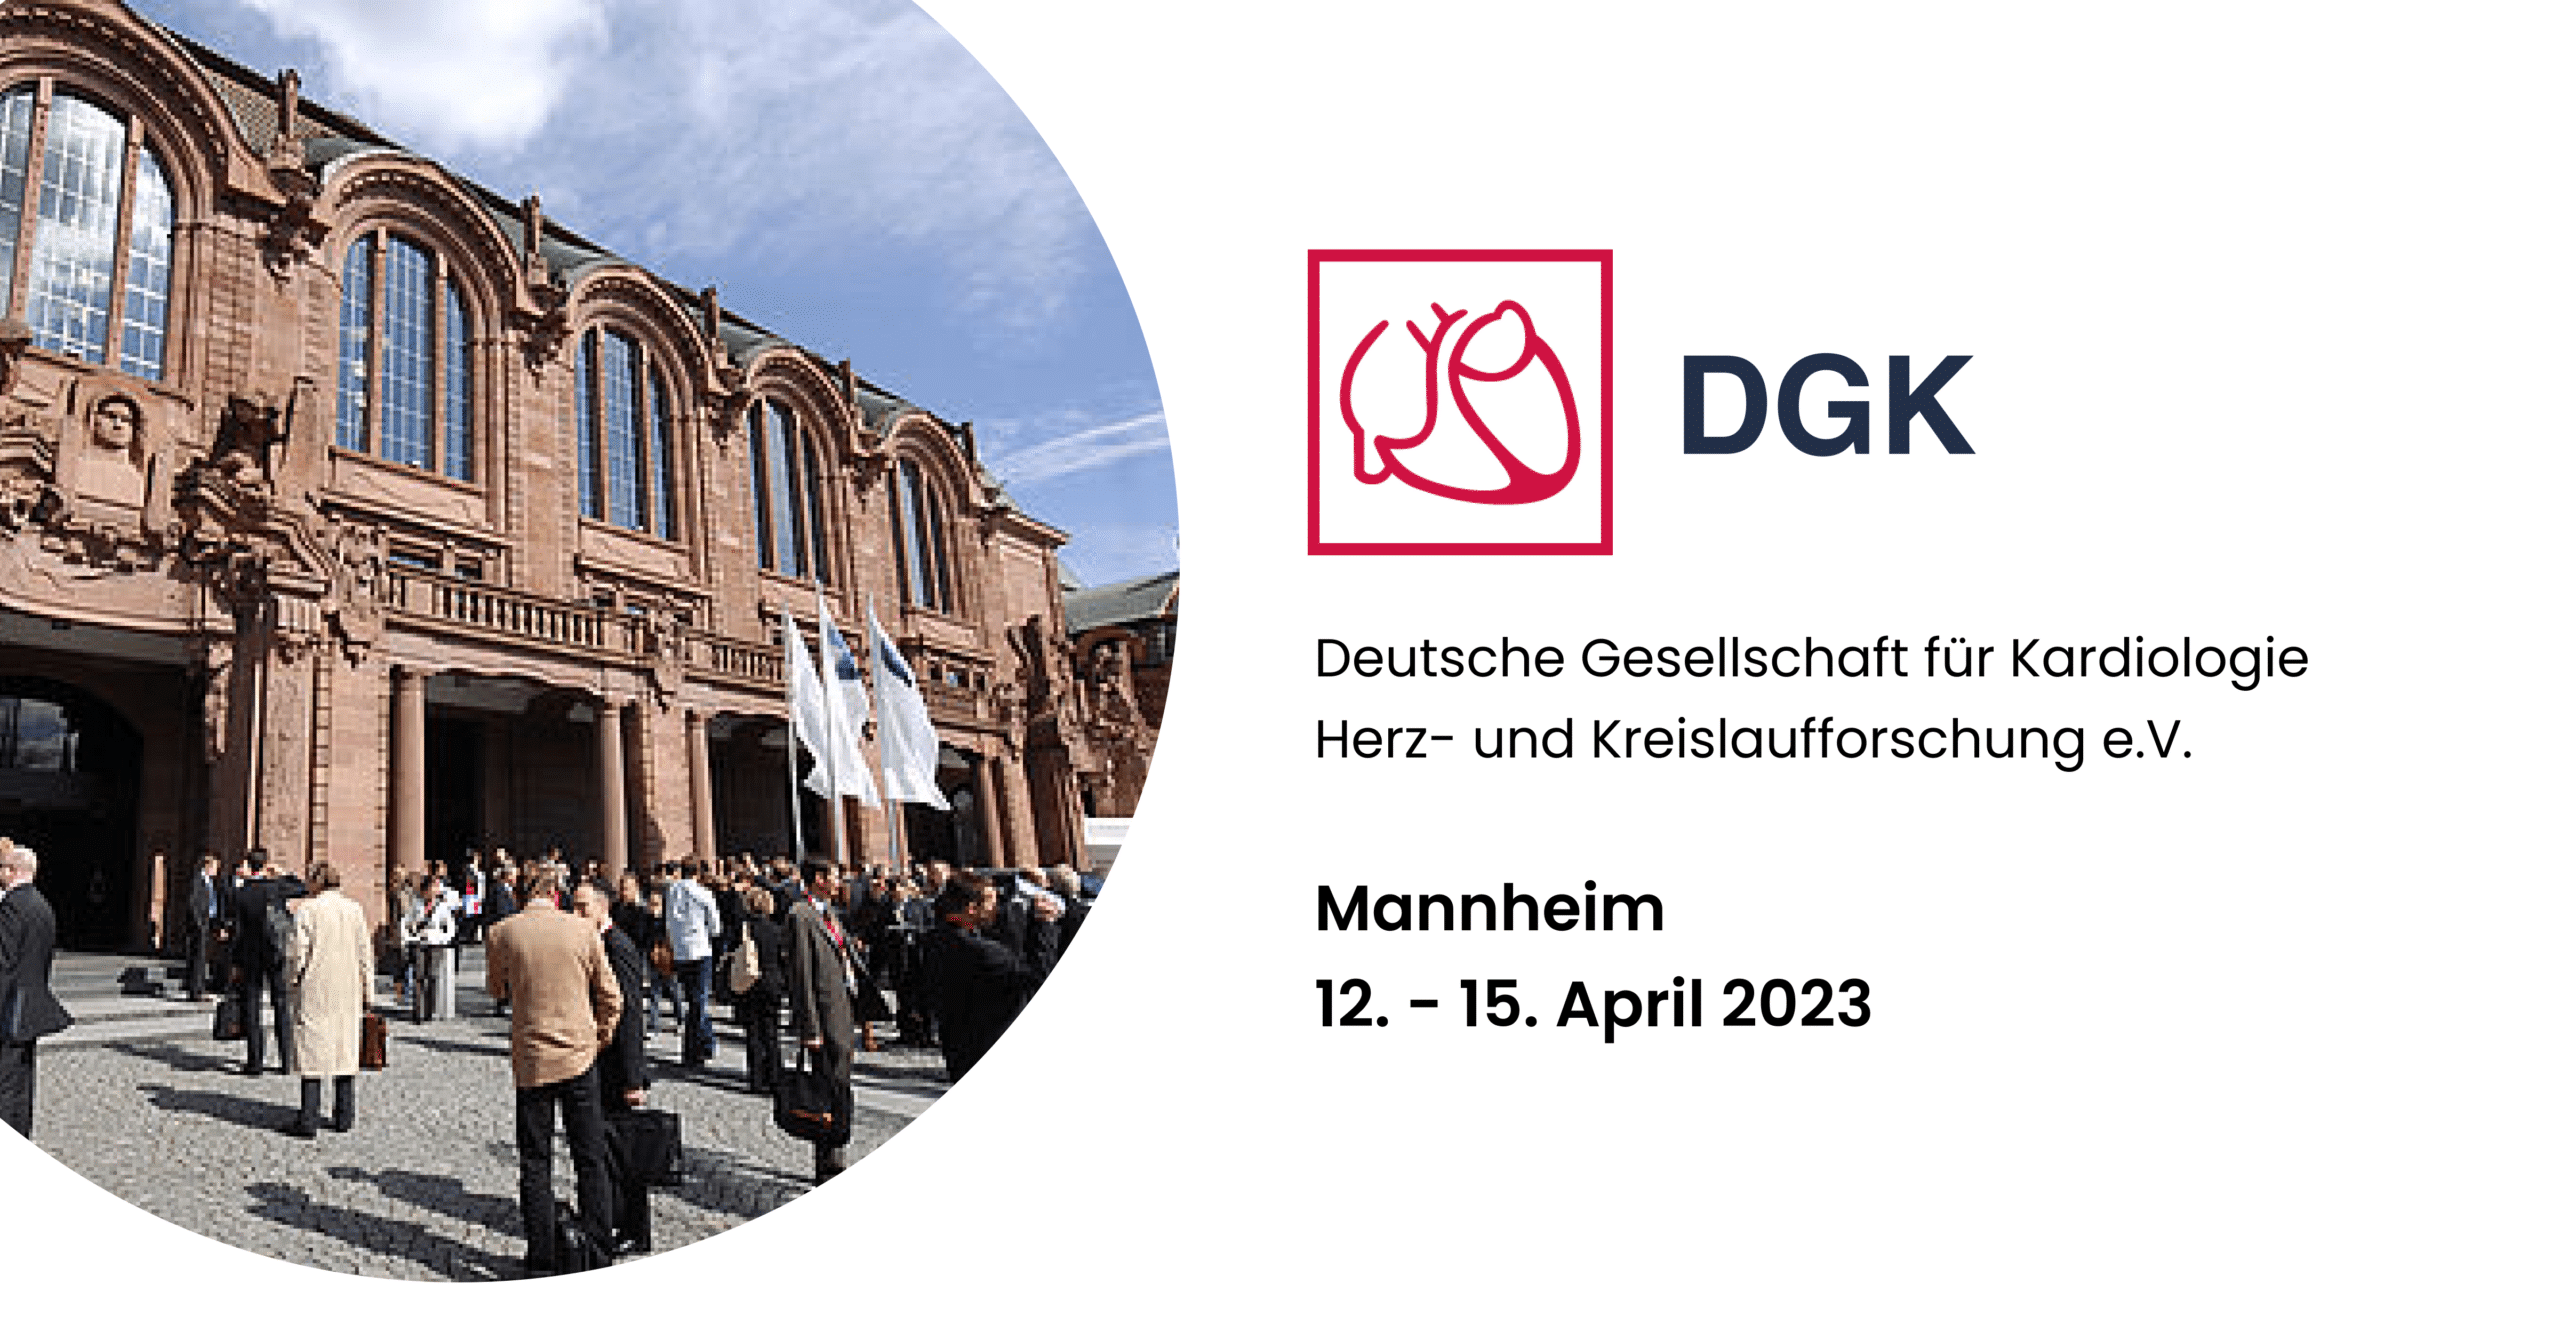 ACTIMI at the annual conference of the DGK 2023 in Mannheim